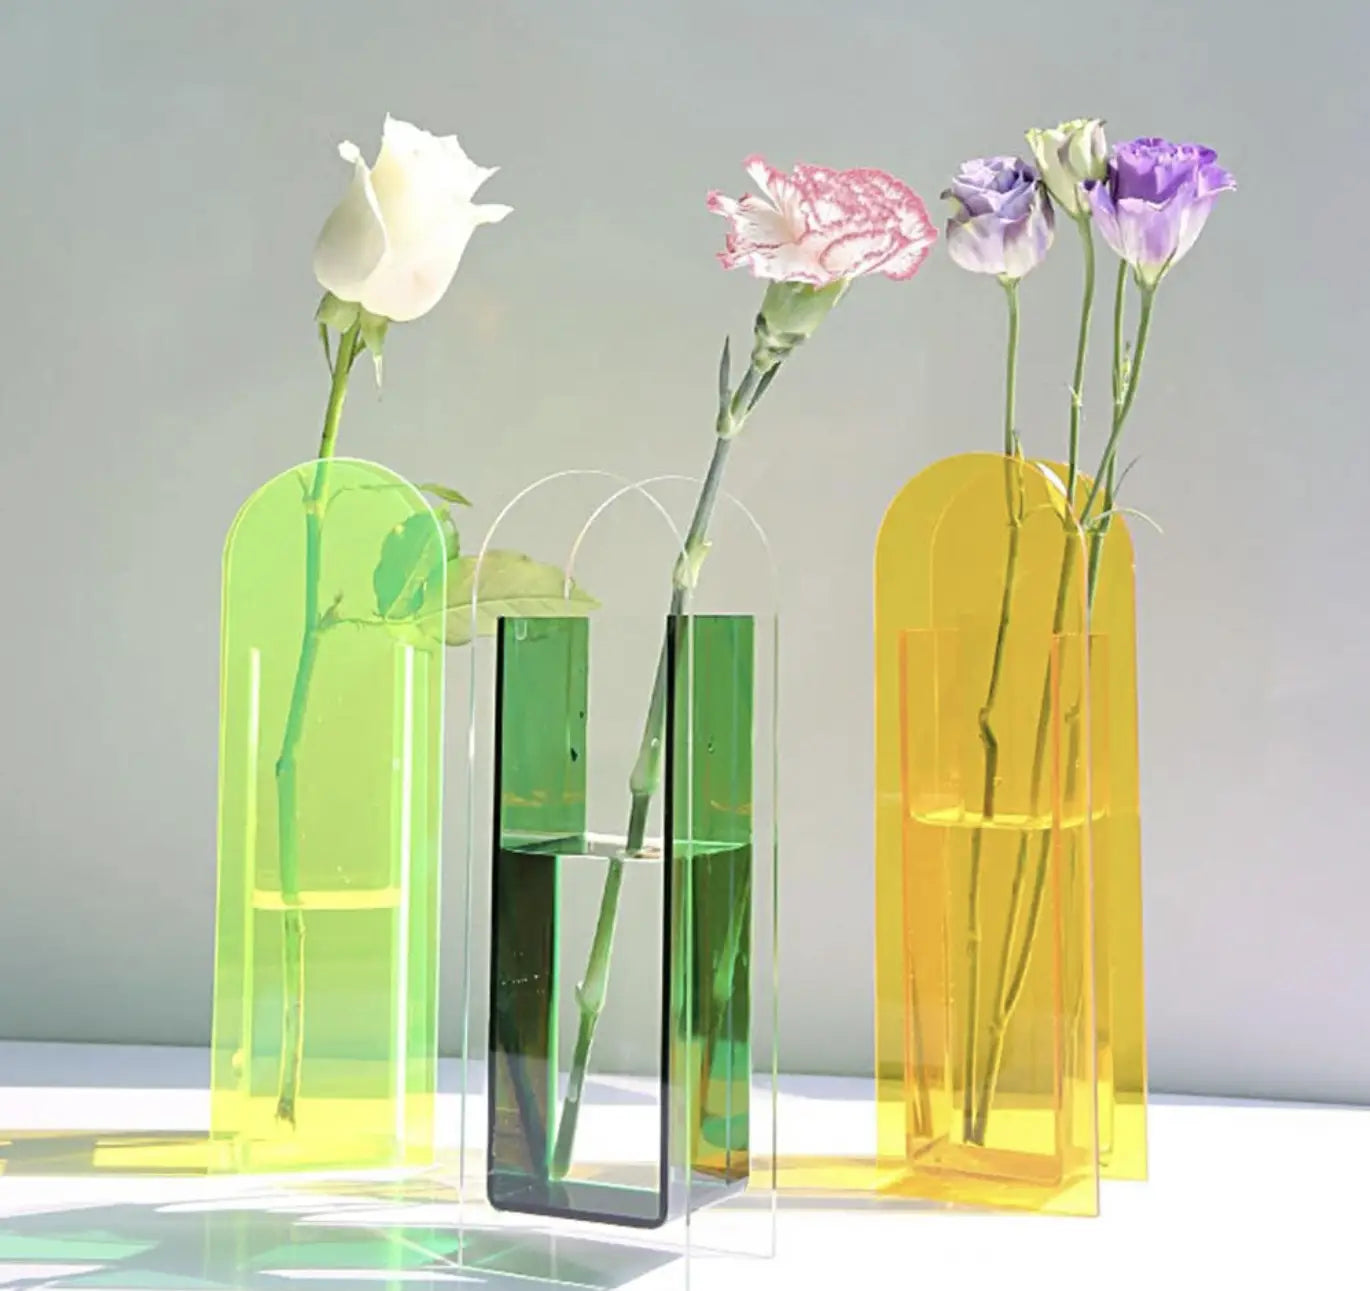 Transparent acrylic flower vases in bright yellow, green, and yellow holding water and carnations